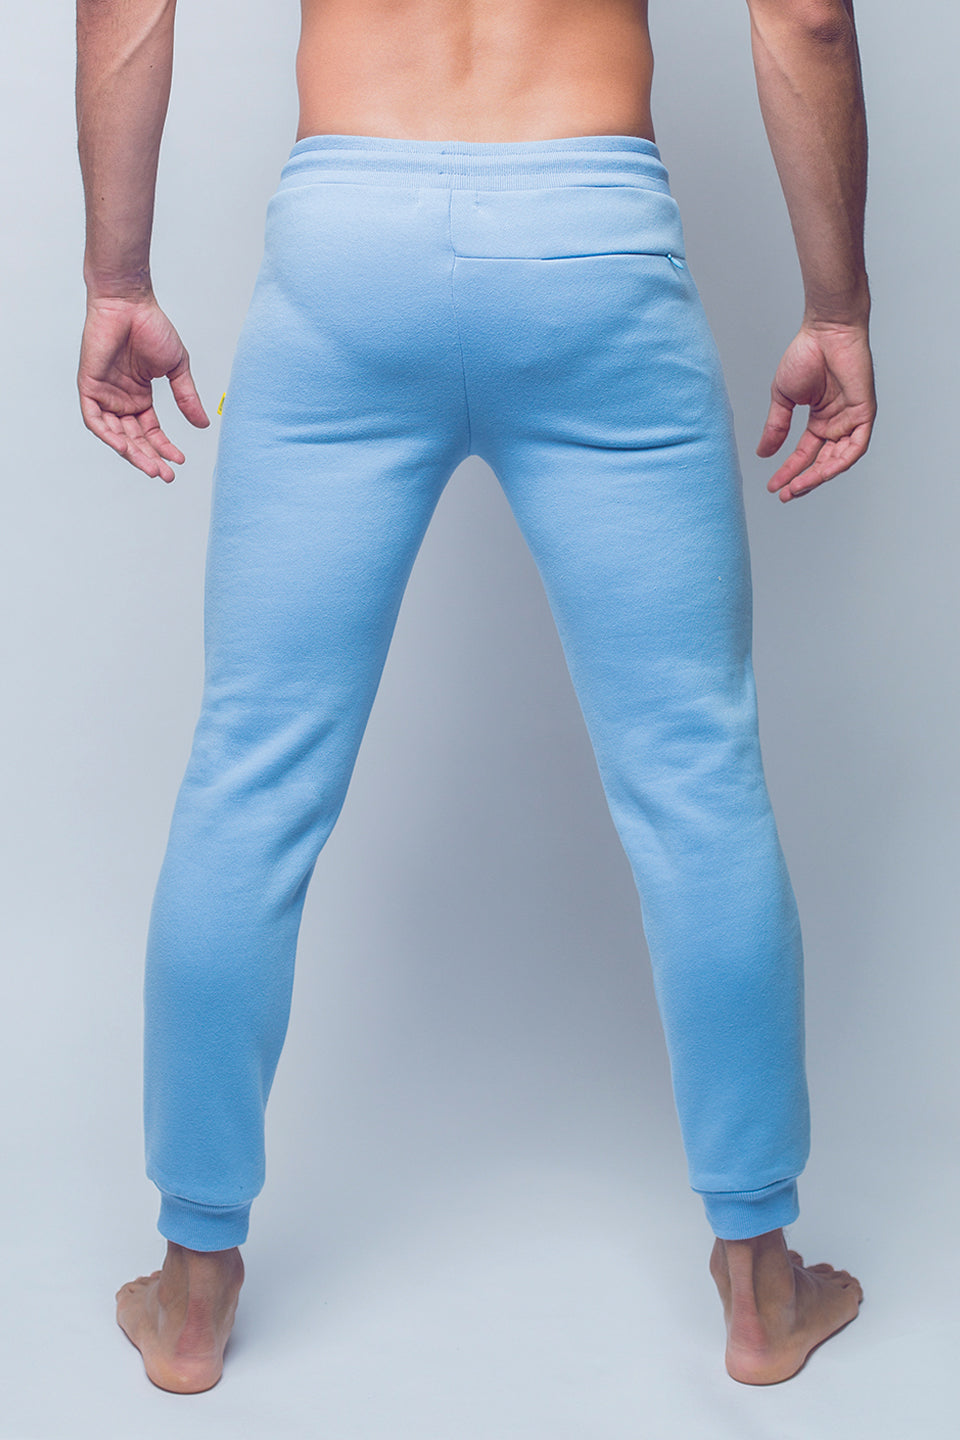 Recovery Pants - Reboot Blue